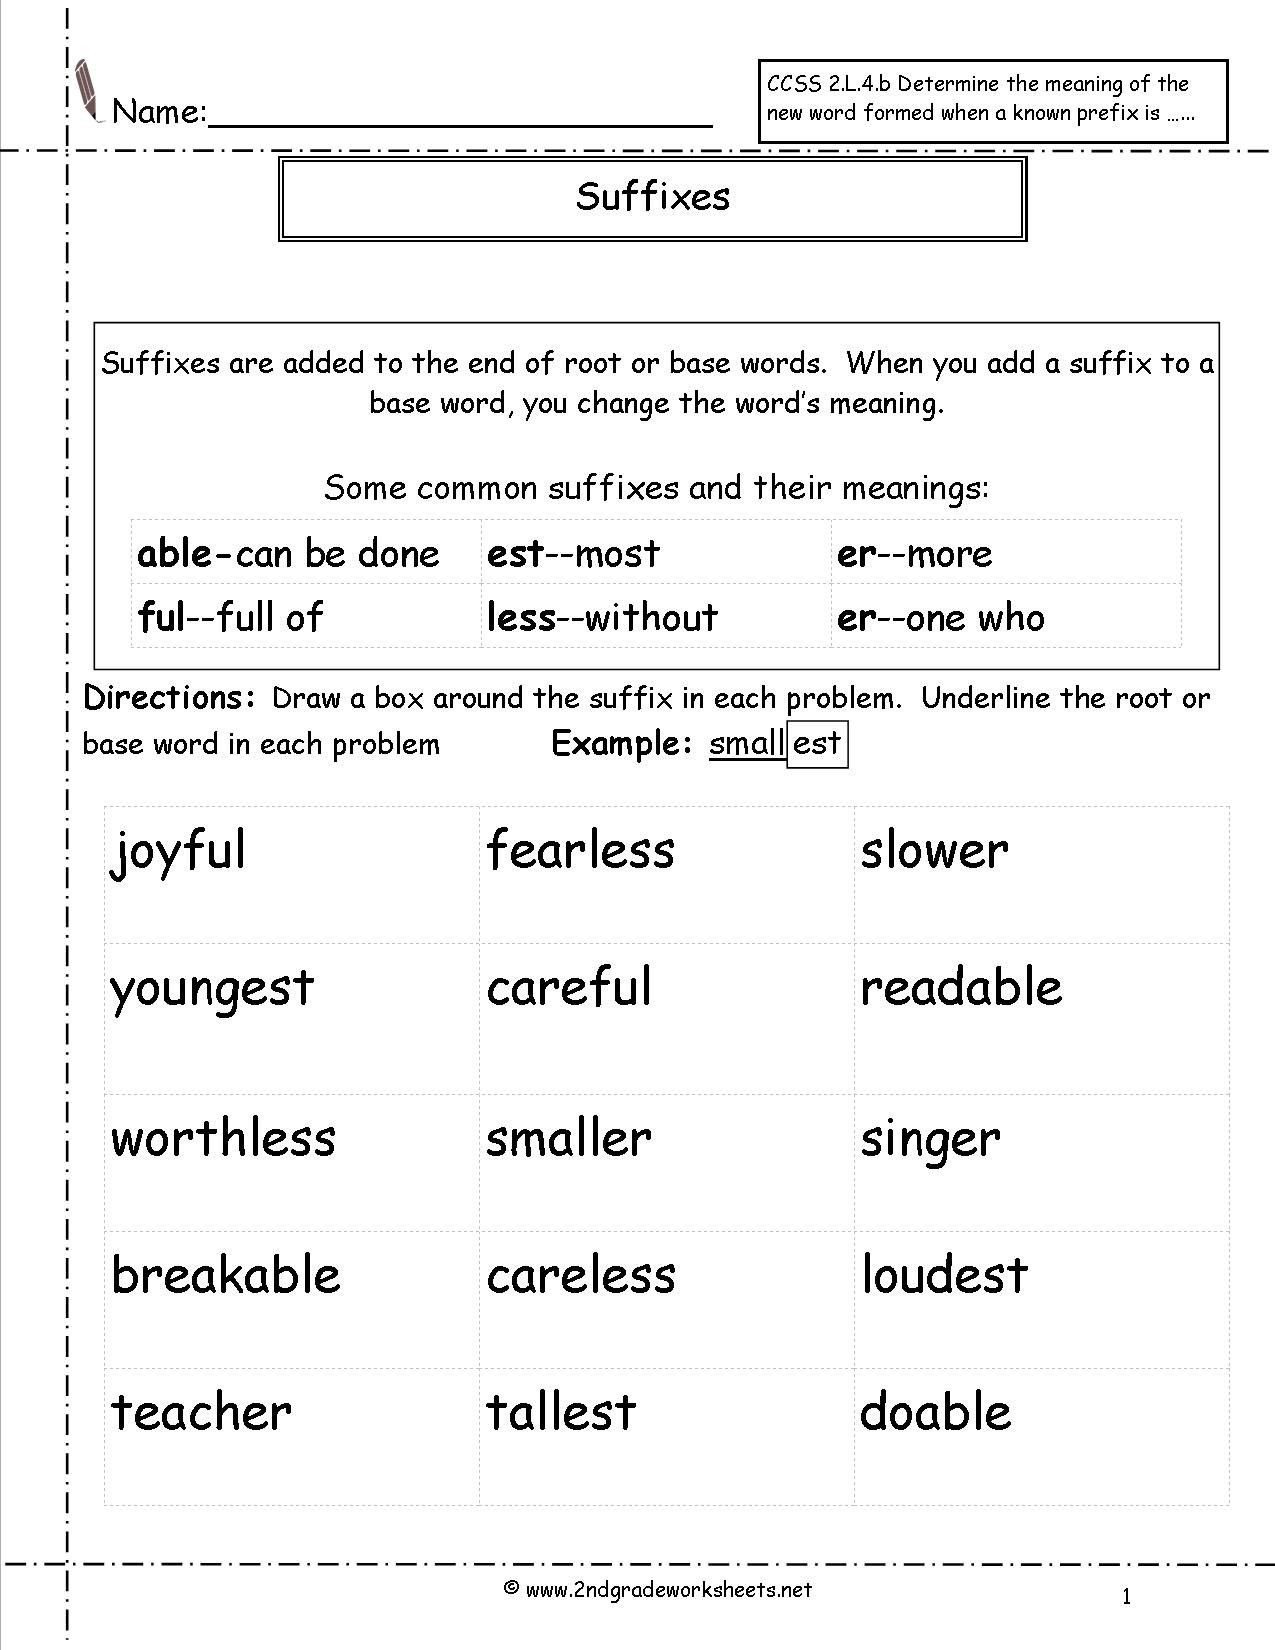 Suffixes Worksheets 4th Grade Suffix Worksheets 2nd Grade